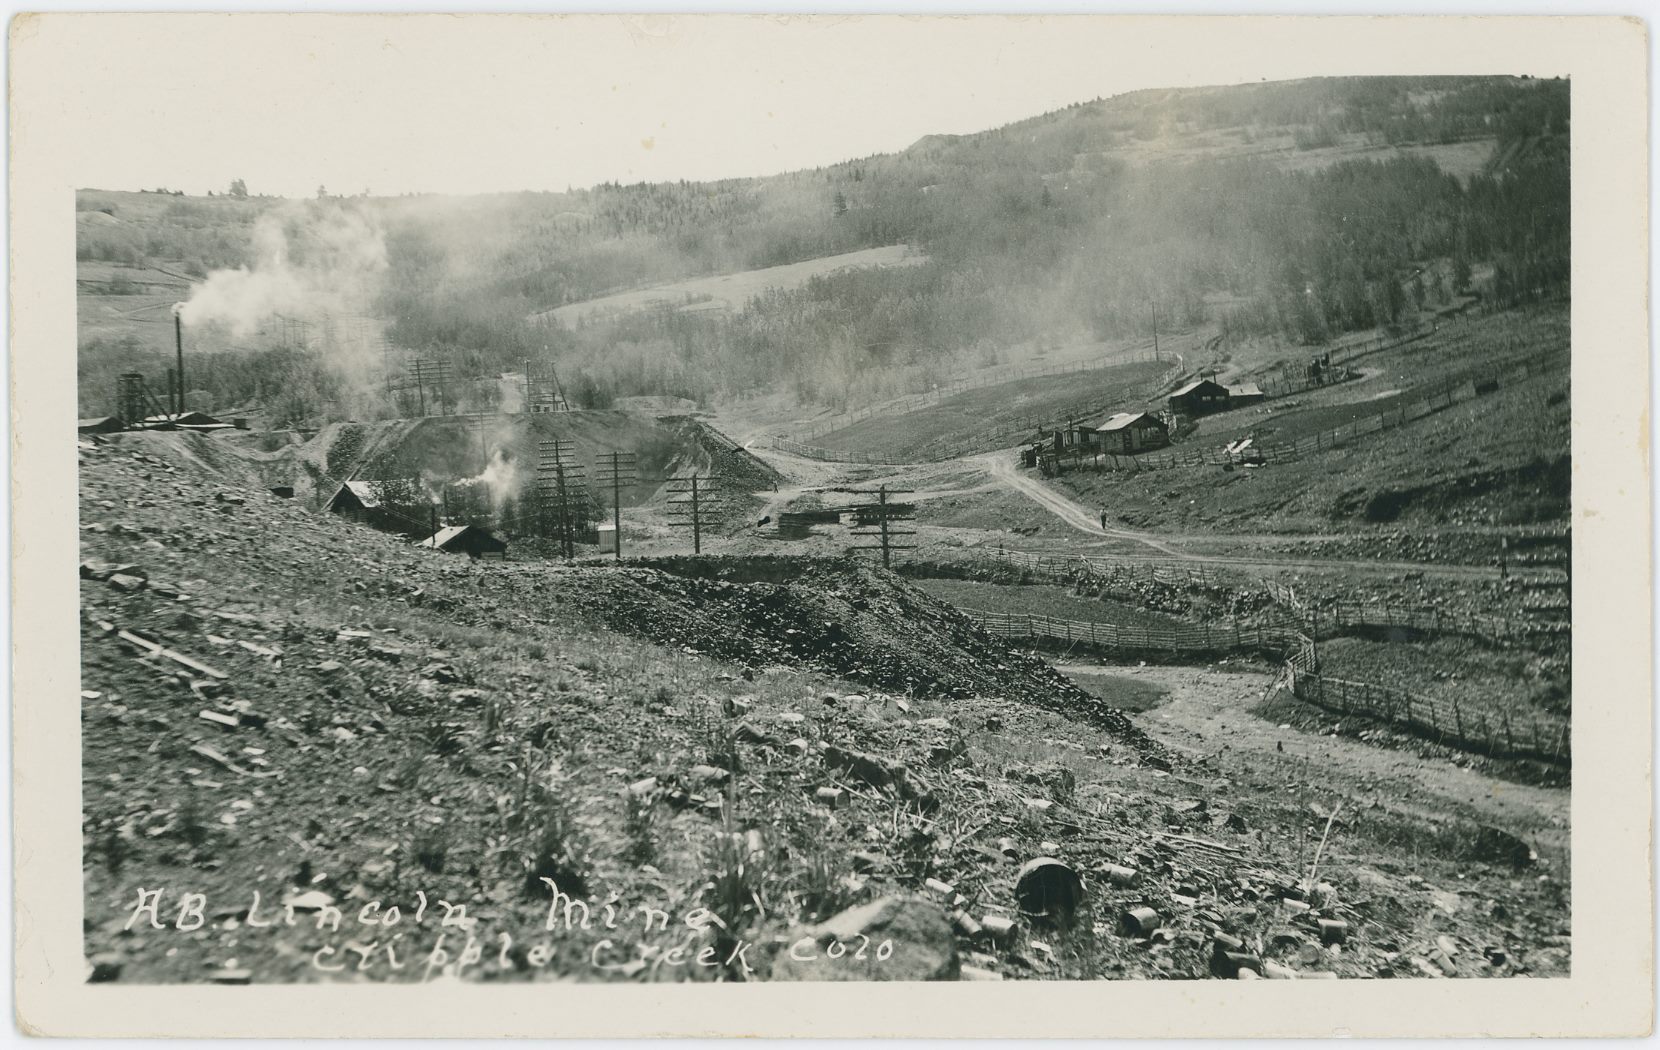 While this card is not marked, the Text Title has same type of writing as another card with the Young name on it, so I assume it is taken by the photographer named Young.
The Scene is in lower Poverty Gulch, looking towards Gold Hill in the background, with the large dump and operations of the Abe Lincoln Mine seen at the edge of the left-hand side, going into the image towards right. The Dump with a hole in the foreground I can't say at this moment in time [13.06.2017] which claim it was located on, so sorry I can't help with that.
What I can say is that I assume this view to be in the 1930's or so, and there are seen two switch-stands about middle top/down on the right-half-part of this view, where I think the one closest to the right-hand edge is the one for a siding at the M.T. Wye below the old Midland Sampler site, while the one to the left is the one for the upper spur that went to the top side of the same Sampler. There also appears to have possible been a loading dock of woods at the end of the spur near the end of the mine dumps of the Abe Lincoln.